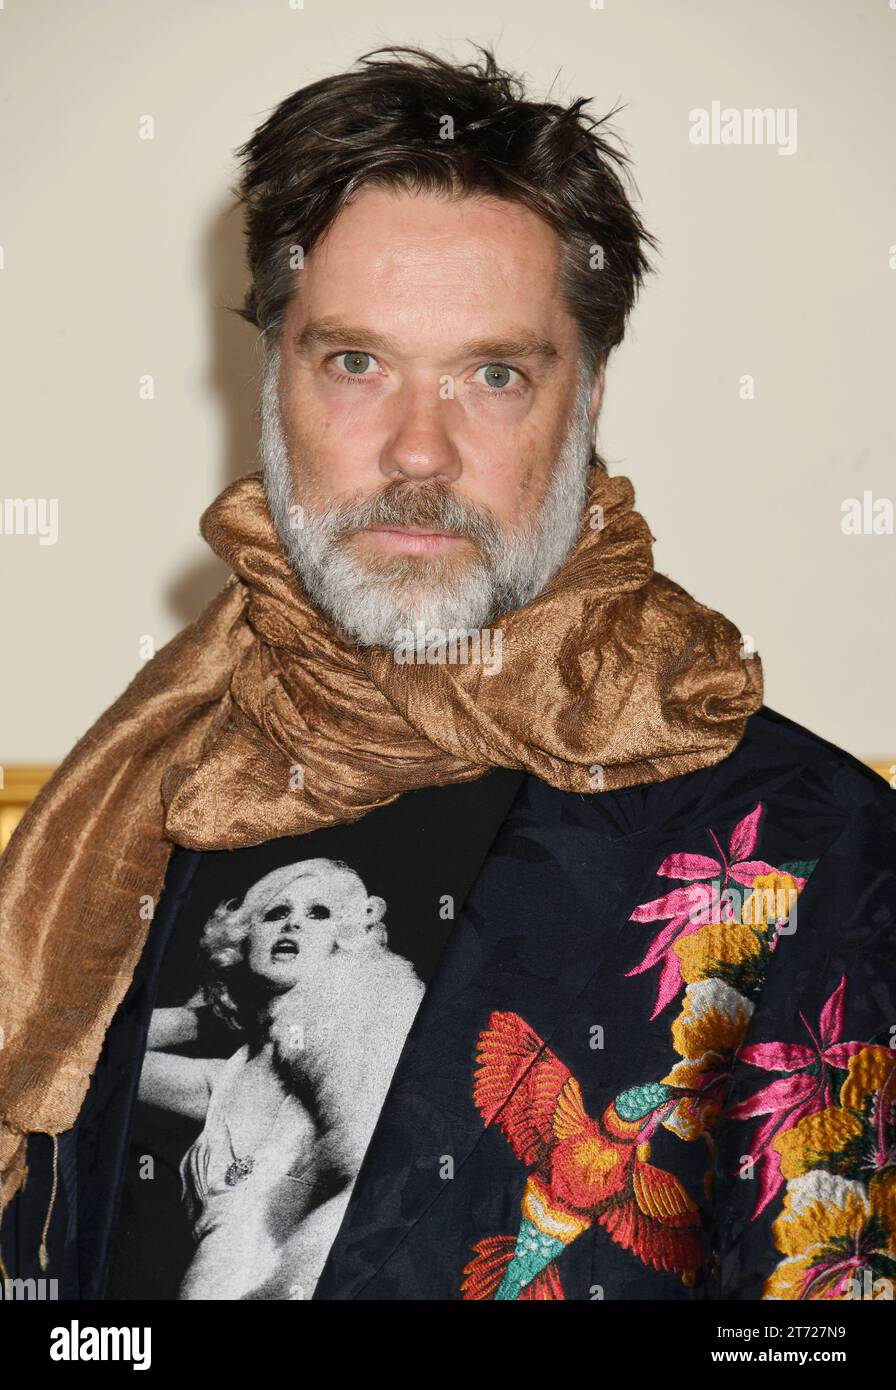 Los Angeles, California, USA. 12th Nov, 2023. Rufus Wainwright attends the premiere of Netflix's 'The Crown' Season 6 Part 1 at Regency Village Theatre on November 12, 2023 in Los Angeles, California. Credit: Jeffrey Mayer/Jtm Photos/Media Punch/Alamy Live News Stock Photo